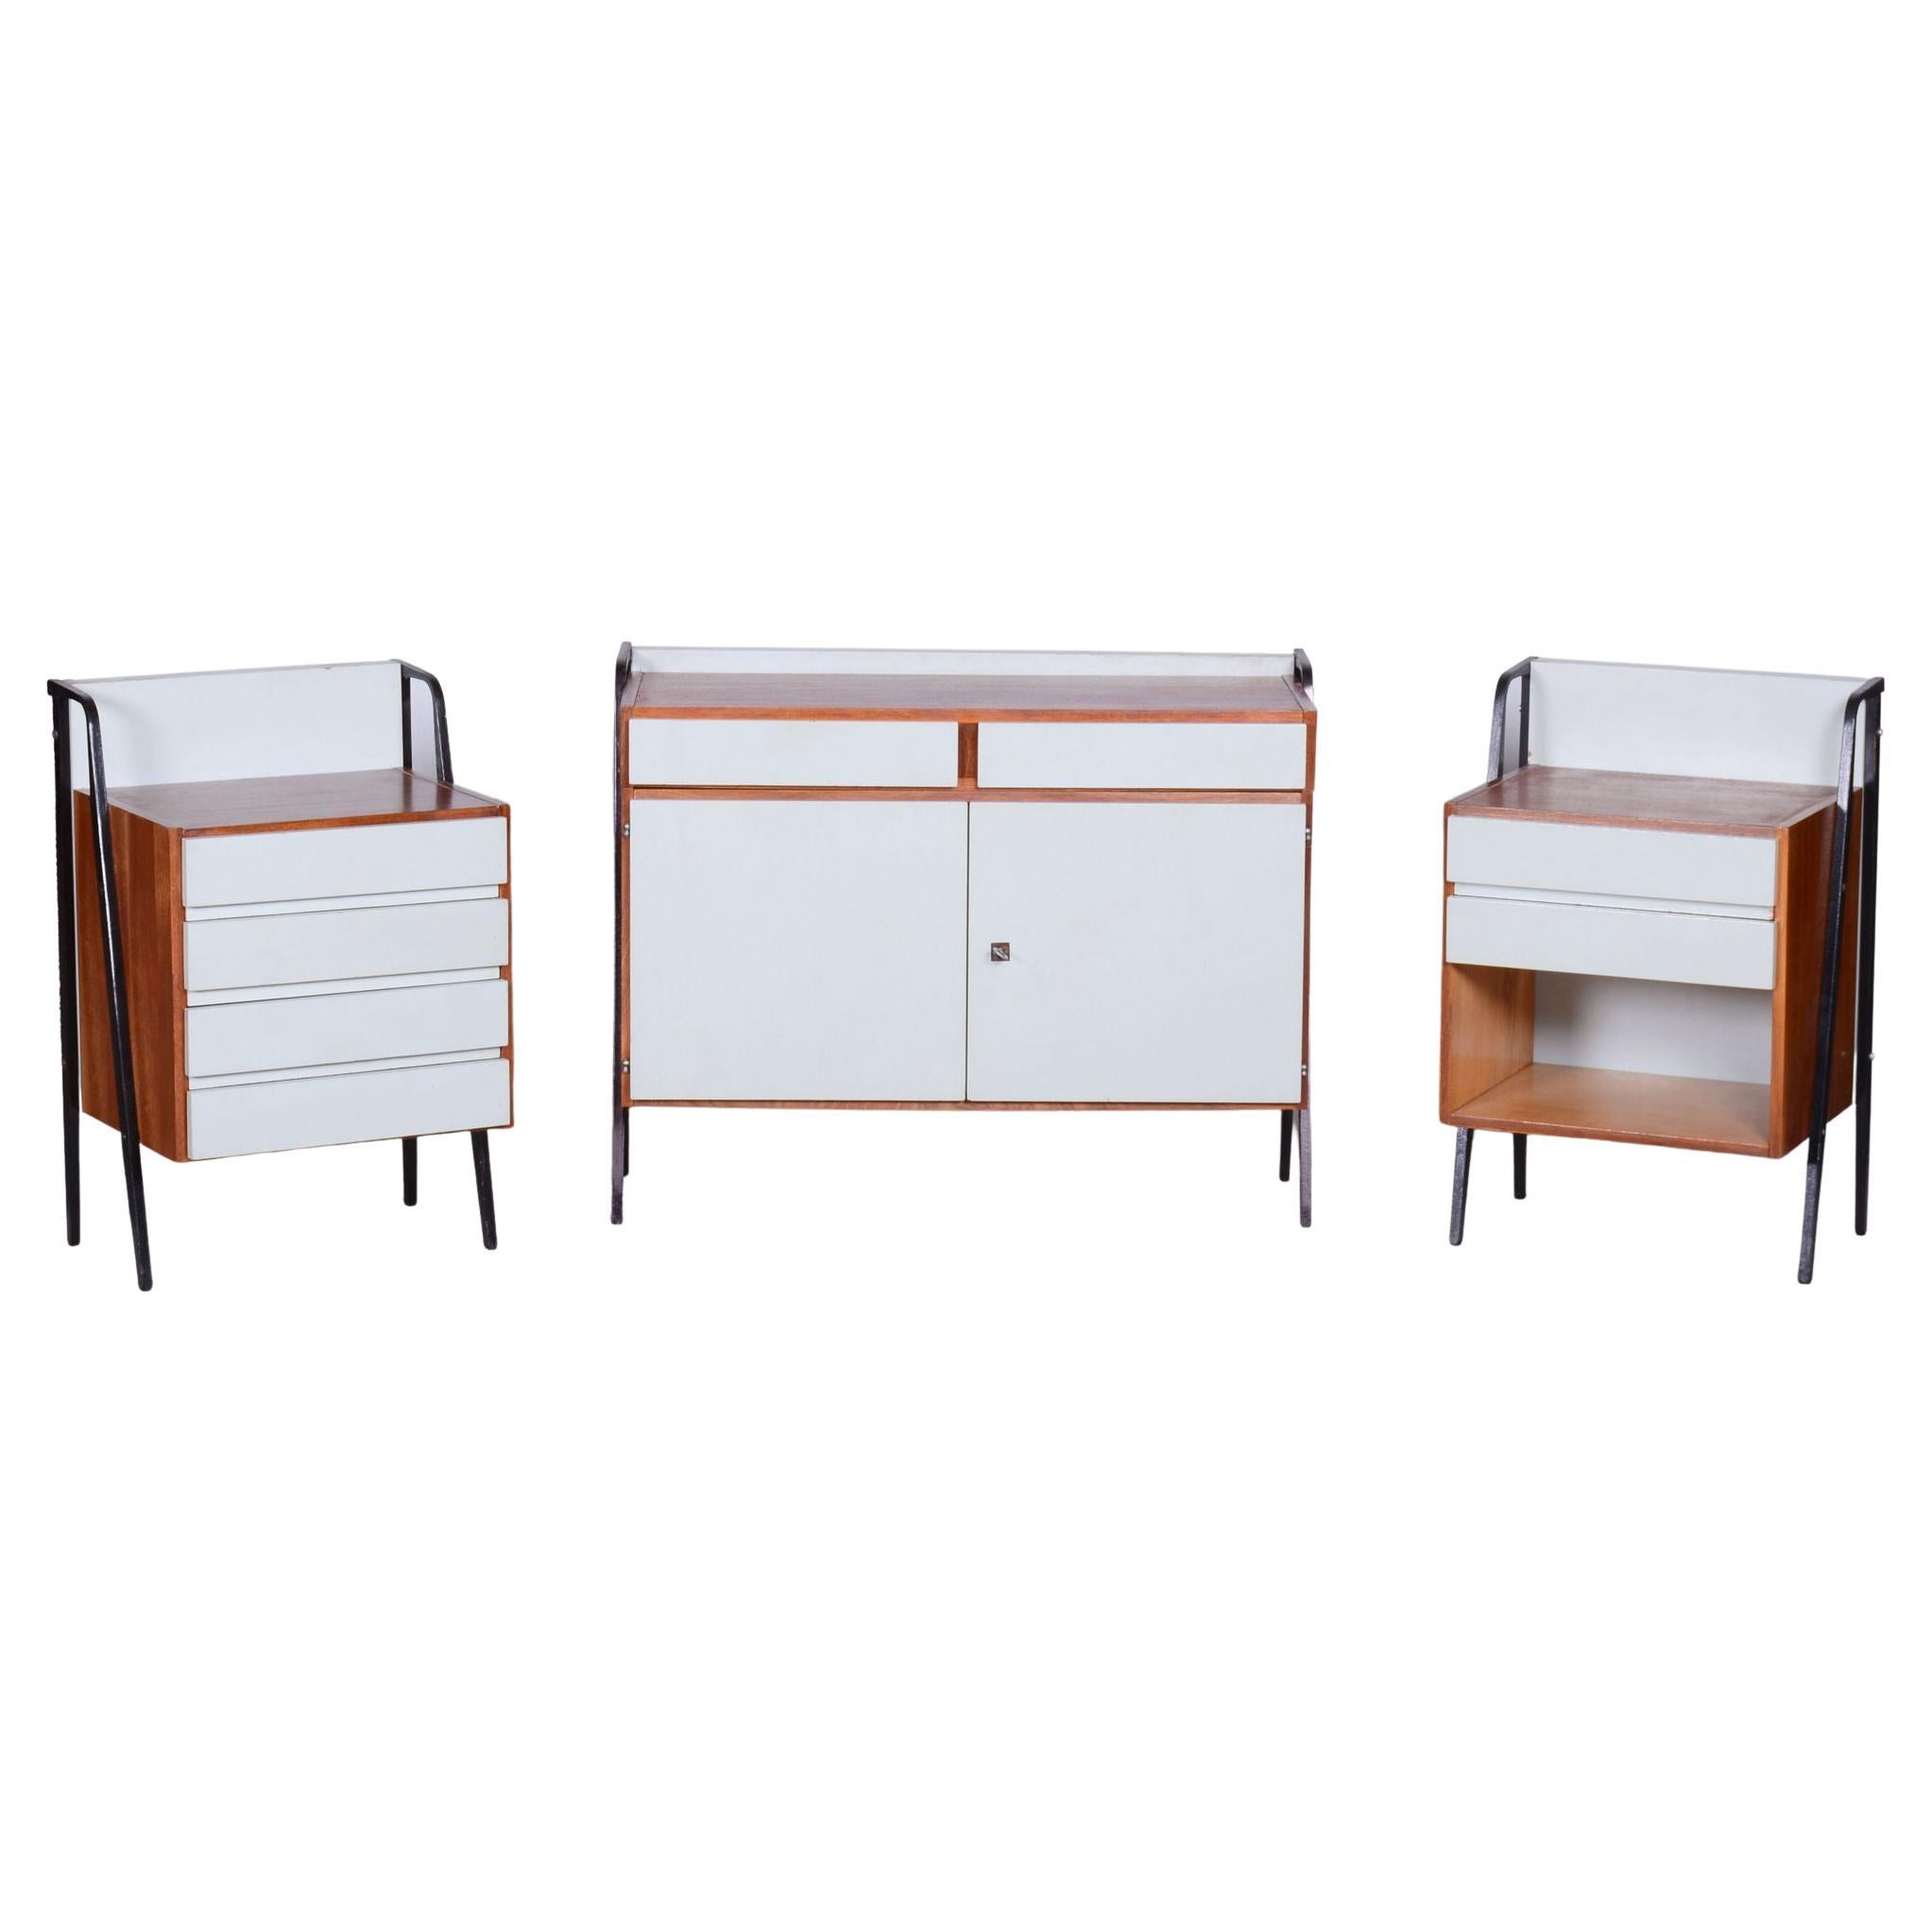 Restored MidCentury Cabinet Set, Mahogany, Revived Polish, Central Europe, 1950s For Sale